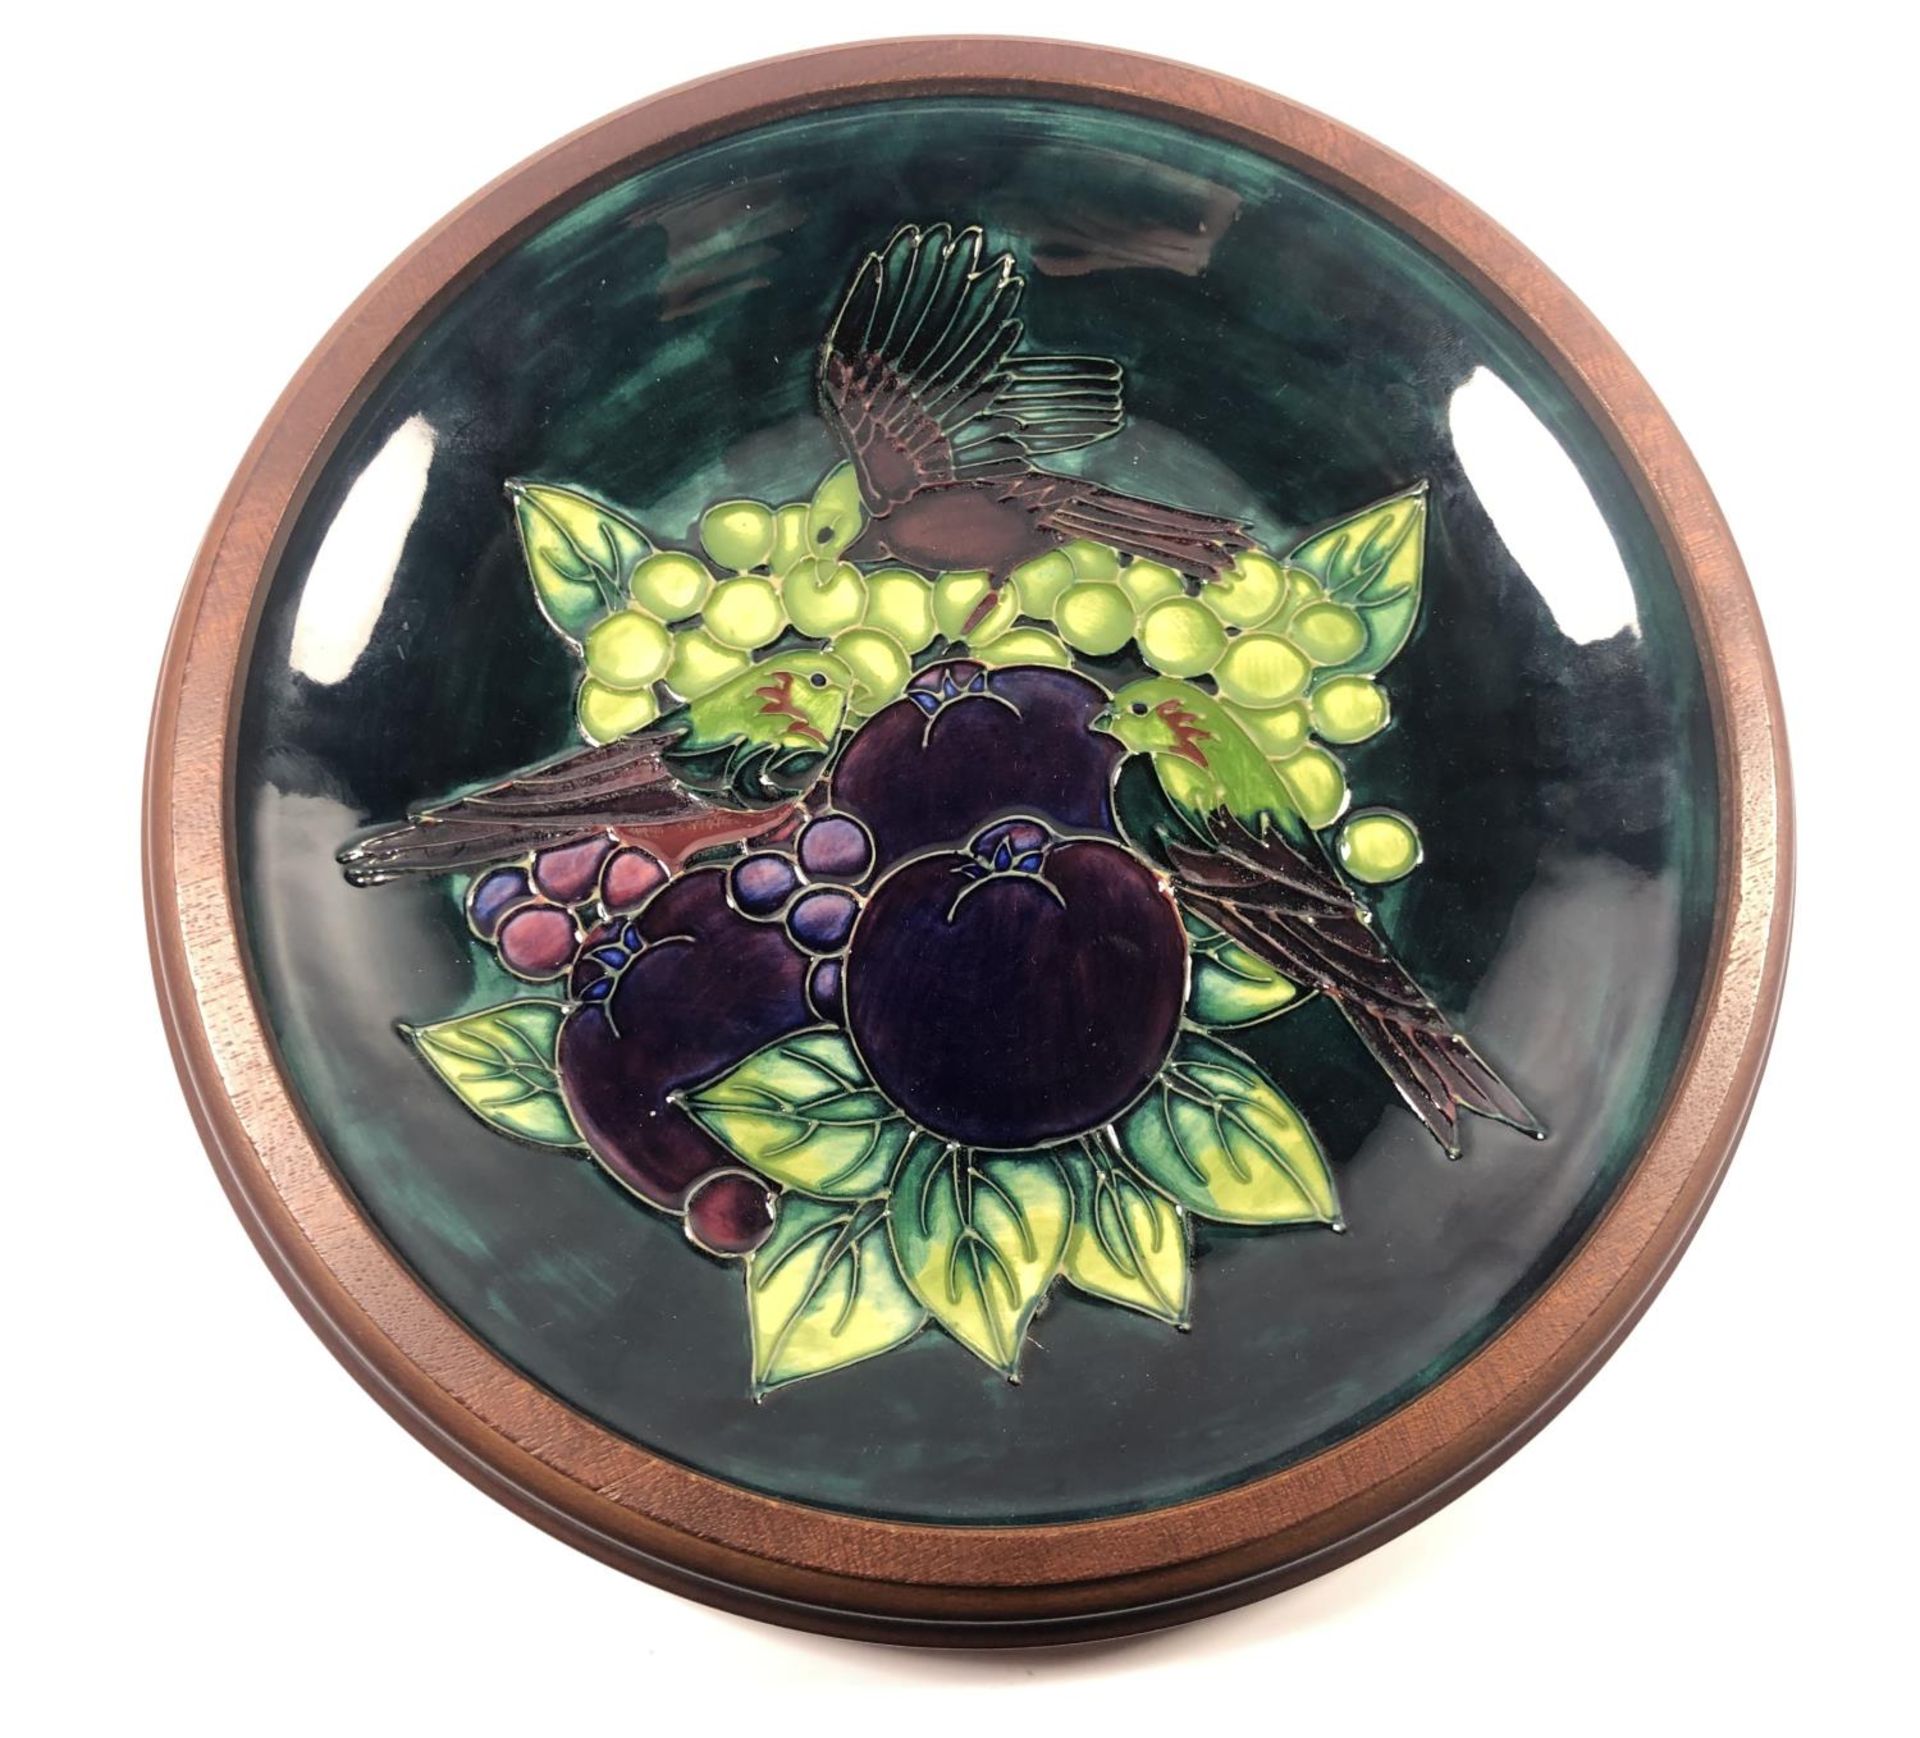 A MOORCROFT POTTERY 'FINCHES AND BERRY' PATTERN PLATE IN WOODEN SURROUND, DIAMETER 29CM (FIRSTS)